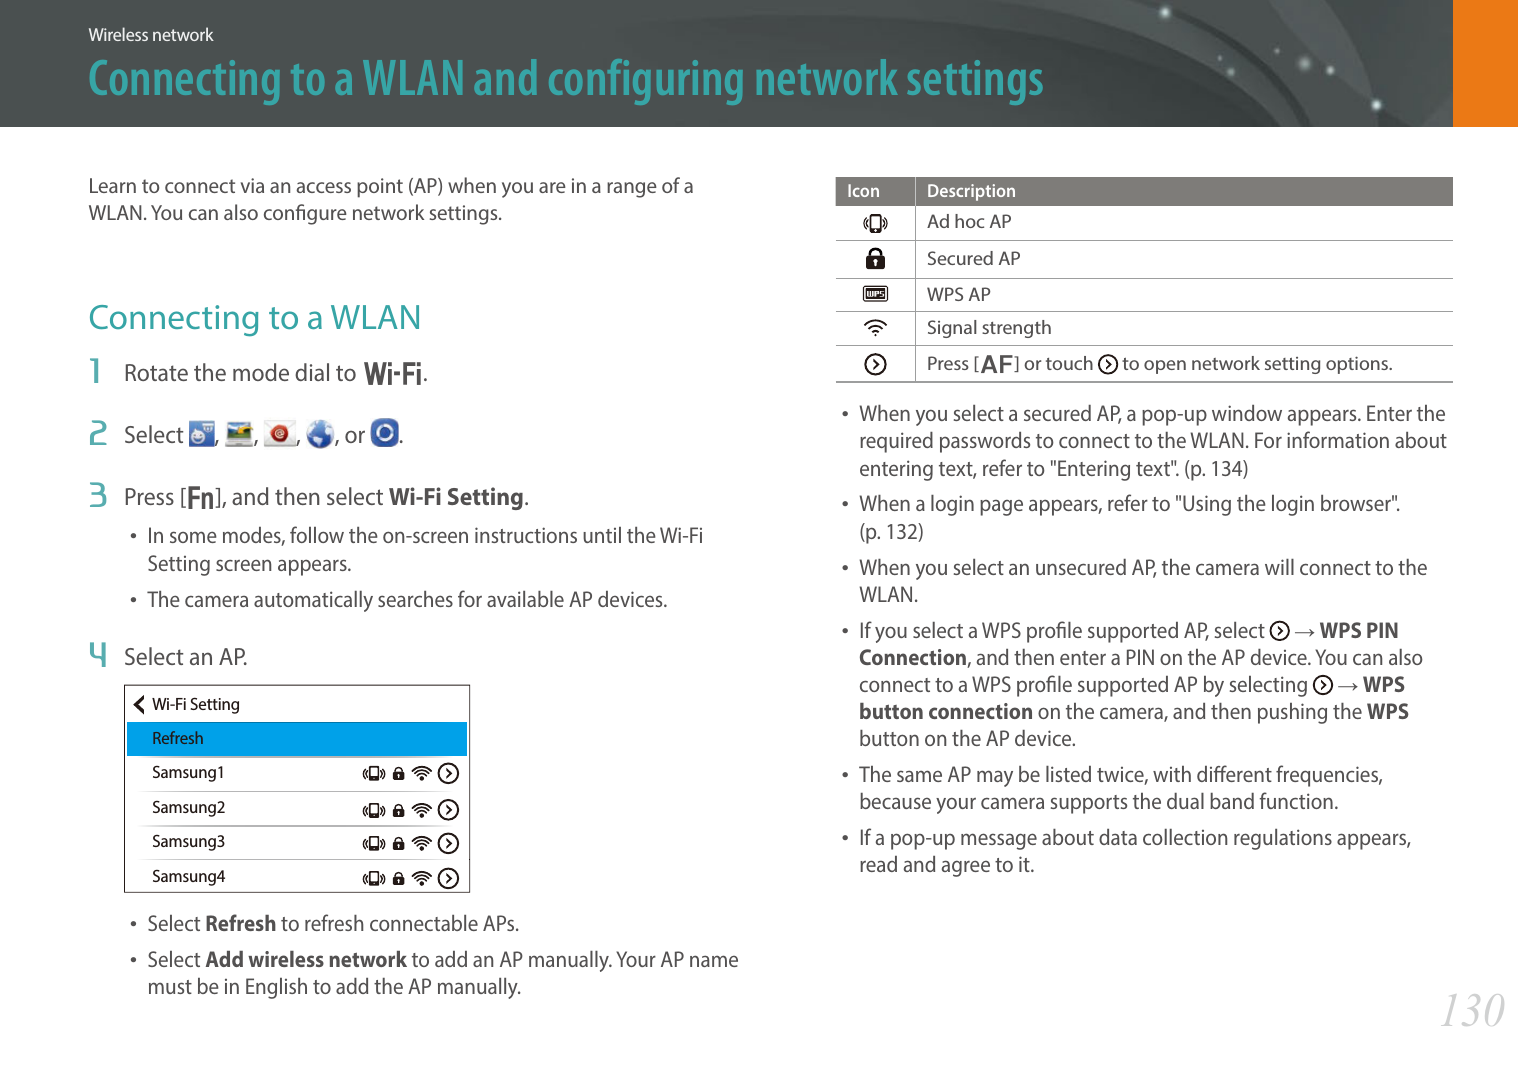 130Wireless networkConnecting to a WLAN and configuring network settingsLearn to connect via an access point (AP) when you are in a range of a WLAN. You can also congure network settings.Connecting to a WLAN1  Rotate the mode dial to B.2  Select  ,  ,  , , or  .3  Press [f], and then select Wi-Fi Setting.• In some modes, follow the on-screen instructions until the Wi-Fi Setting screen appears.• The camera automatically searches for available AP devices.4  Select an AP.Wi-Fi SettingRefreshSamsung1Samsung2Samsung3Samsung4• Select Refresh to refresh connectable APs.• Select Add wireless network to add an AP manually. Your AP name must be in English to add the AP manually.Icon DescriptionAd hoc APSecured APWPS APSignal strengthPress [F] or touch   to open network setting options.• When you select a secured AP, a pop-up window appears. Enter the required passwords to connect to the WLAN. For information about entering text, refer to &quot;Entering text&quot;. (p. 134)• When a login page appears, refer to &quot;Using the login browser&quot;.  (p. 132)• When you select an unsecured AP, the camera will connect to the WLAN.• If you select a WPS prole supported AP, select   ĺ WPS PIN Connection, and then enter a PIN on the AP device. You can also connect to a WPS prole supported AP by selecting   ĺ WPS button connection on the camera, and then pushing the WPS button on the AP device.• The same AP may be listed twice, with dierent frequencies, because your camera supports the dual band function.• If a pop-up message about data collection regulations appears, read and agree to it. 